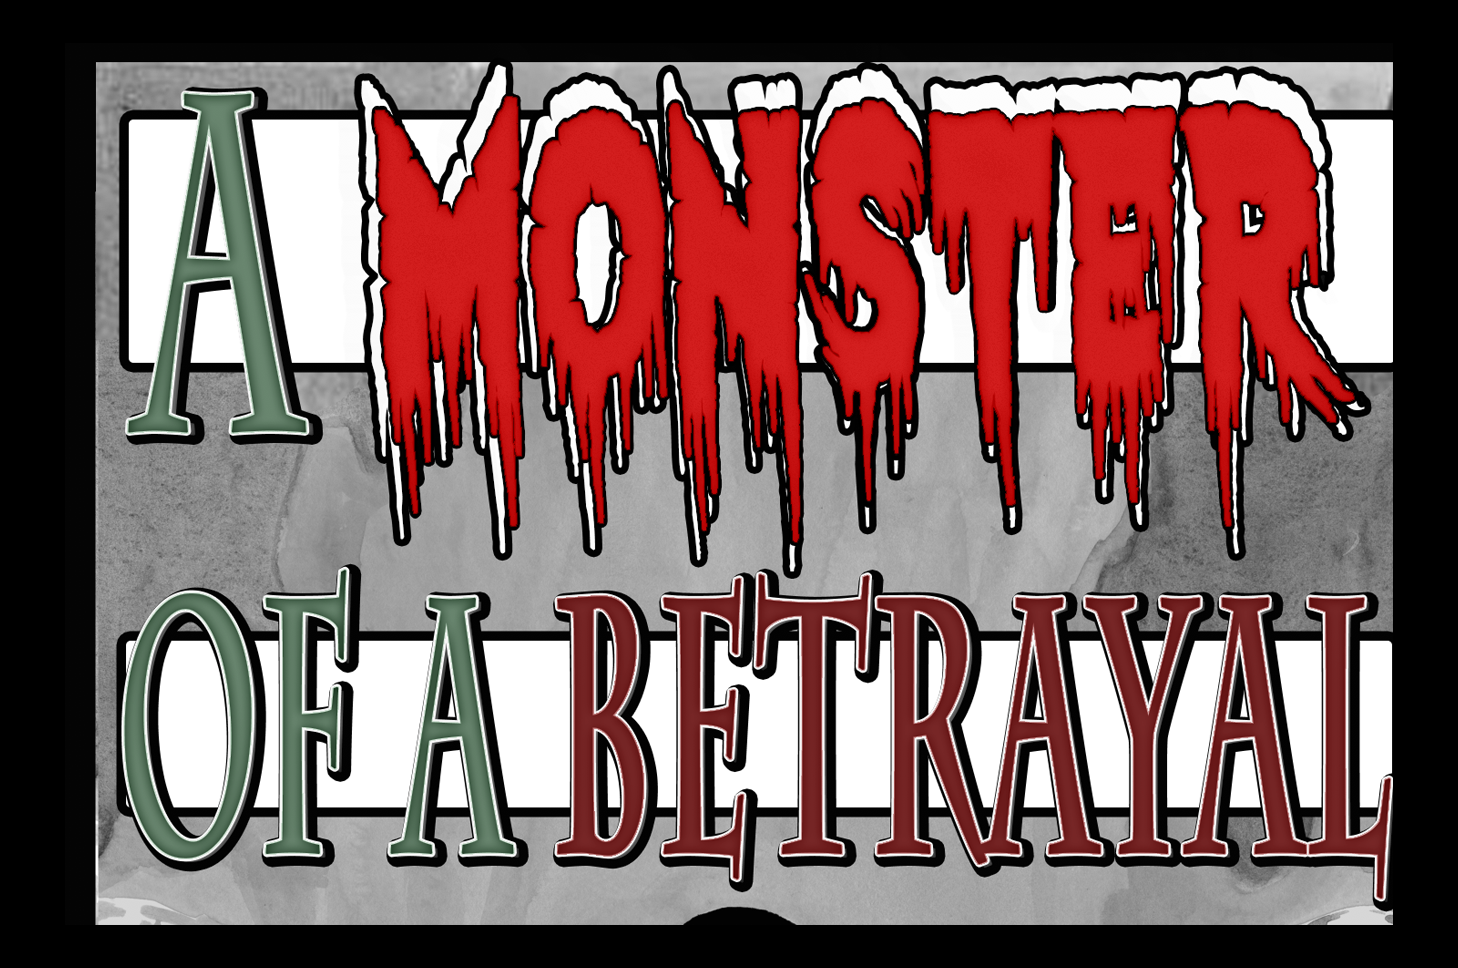 THEY’RE ALIVE… THEY’RE ALIVE…The “MONSTERS” are back in “A MONSTER OF A BETRAYAL”